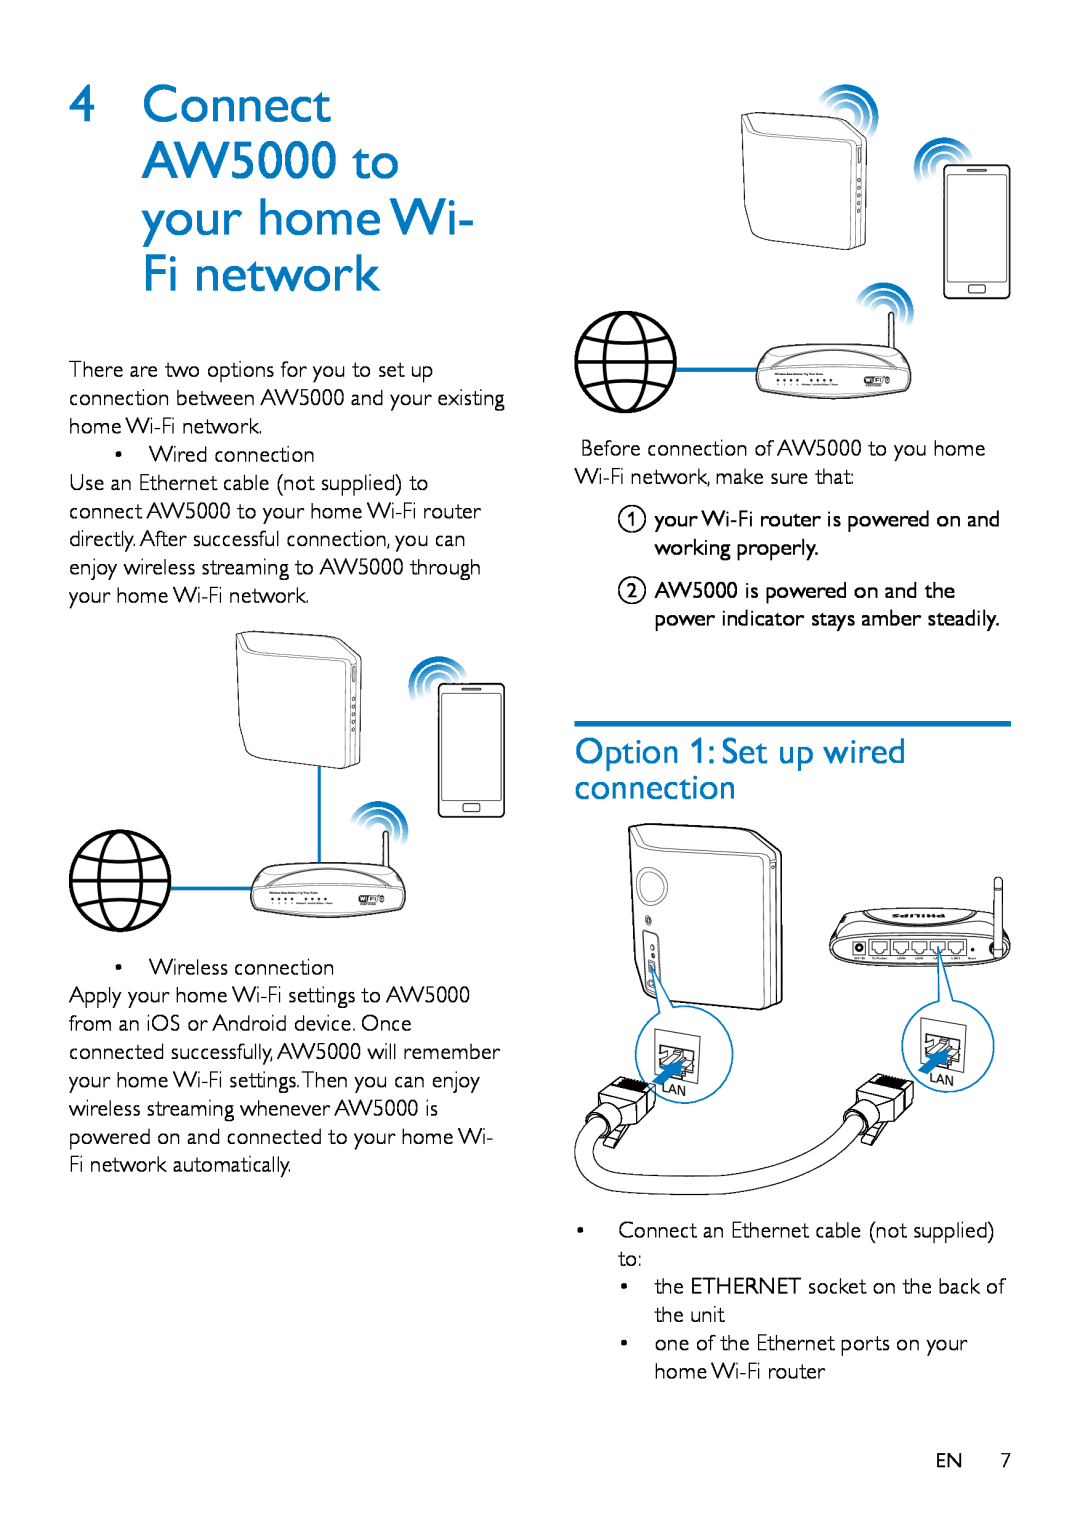 Philips user manual 4Connect AW5000 to your home Wi- Fi network, Option 1 Set up wired connection 